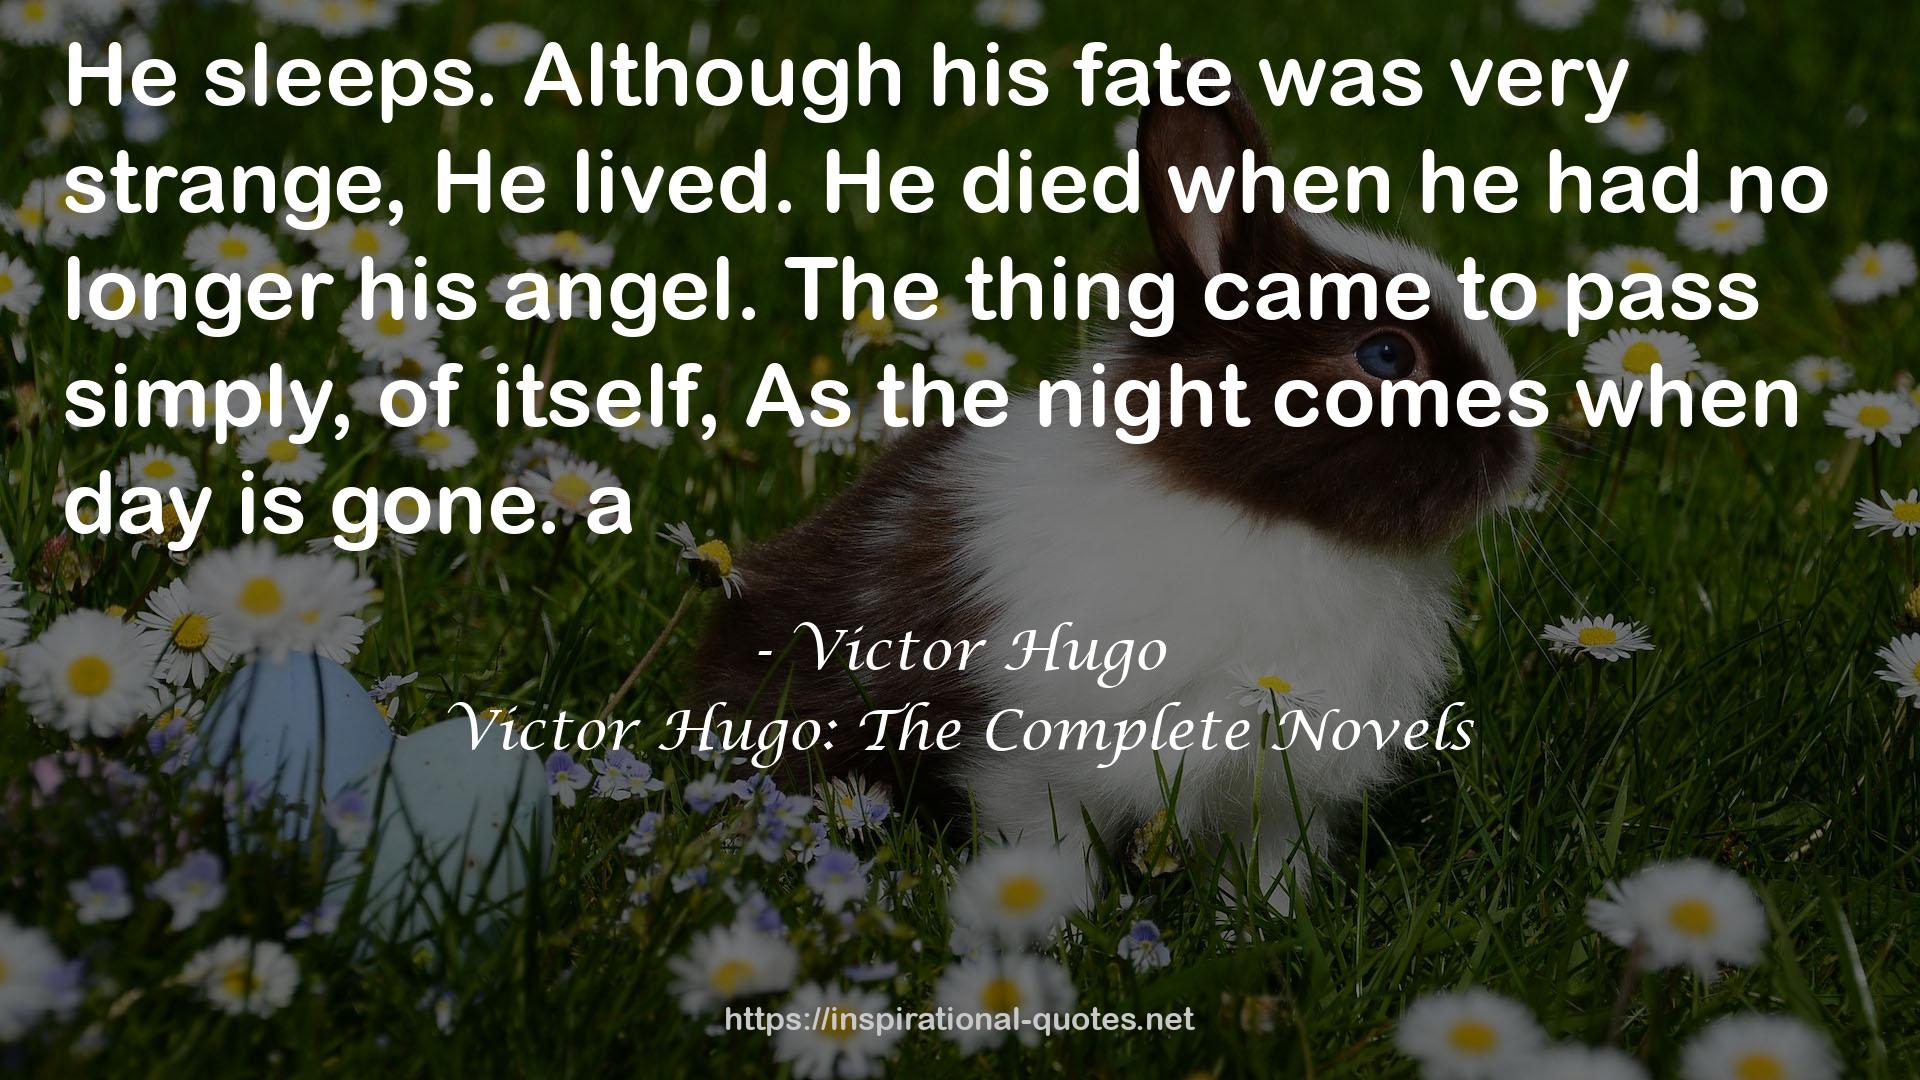 Victor Hugo: The Complete Novels QUOTES